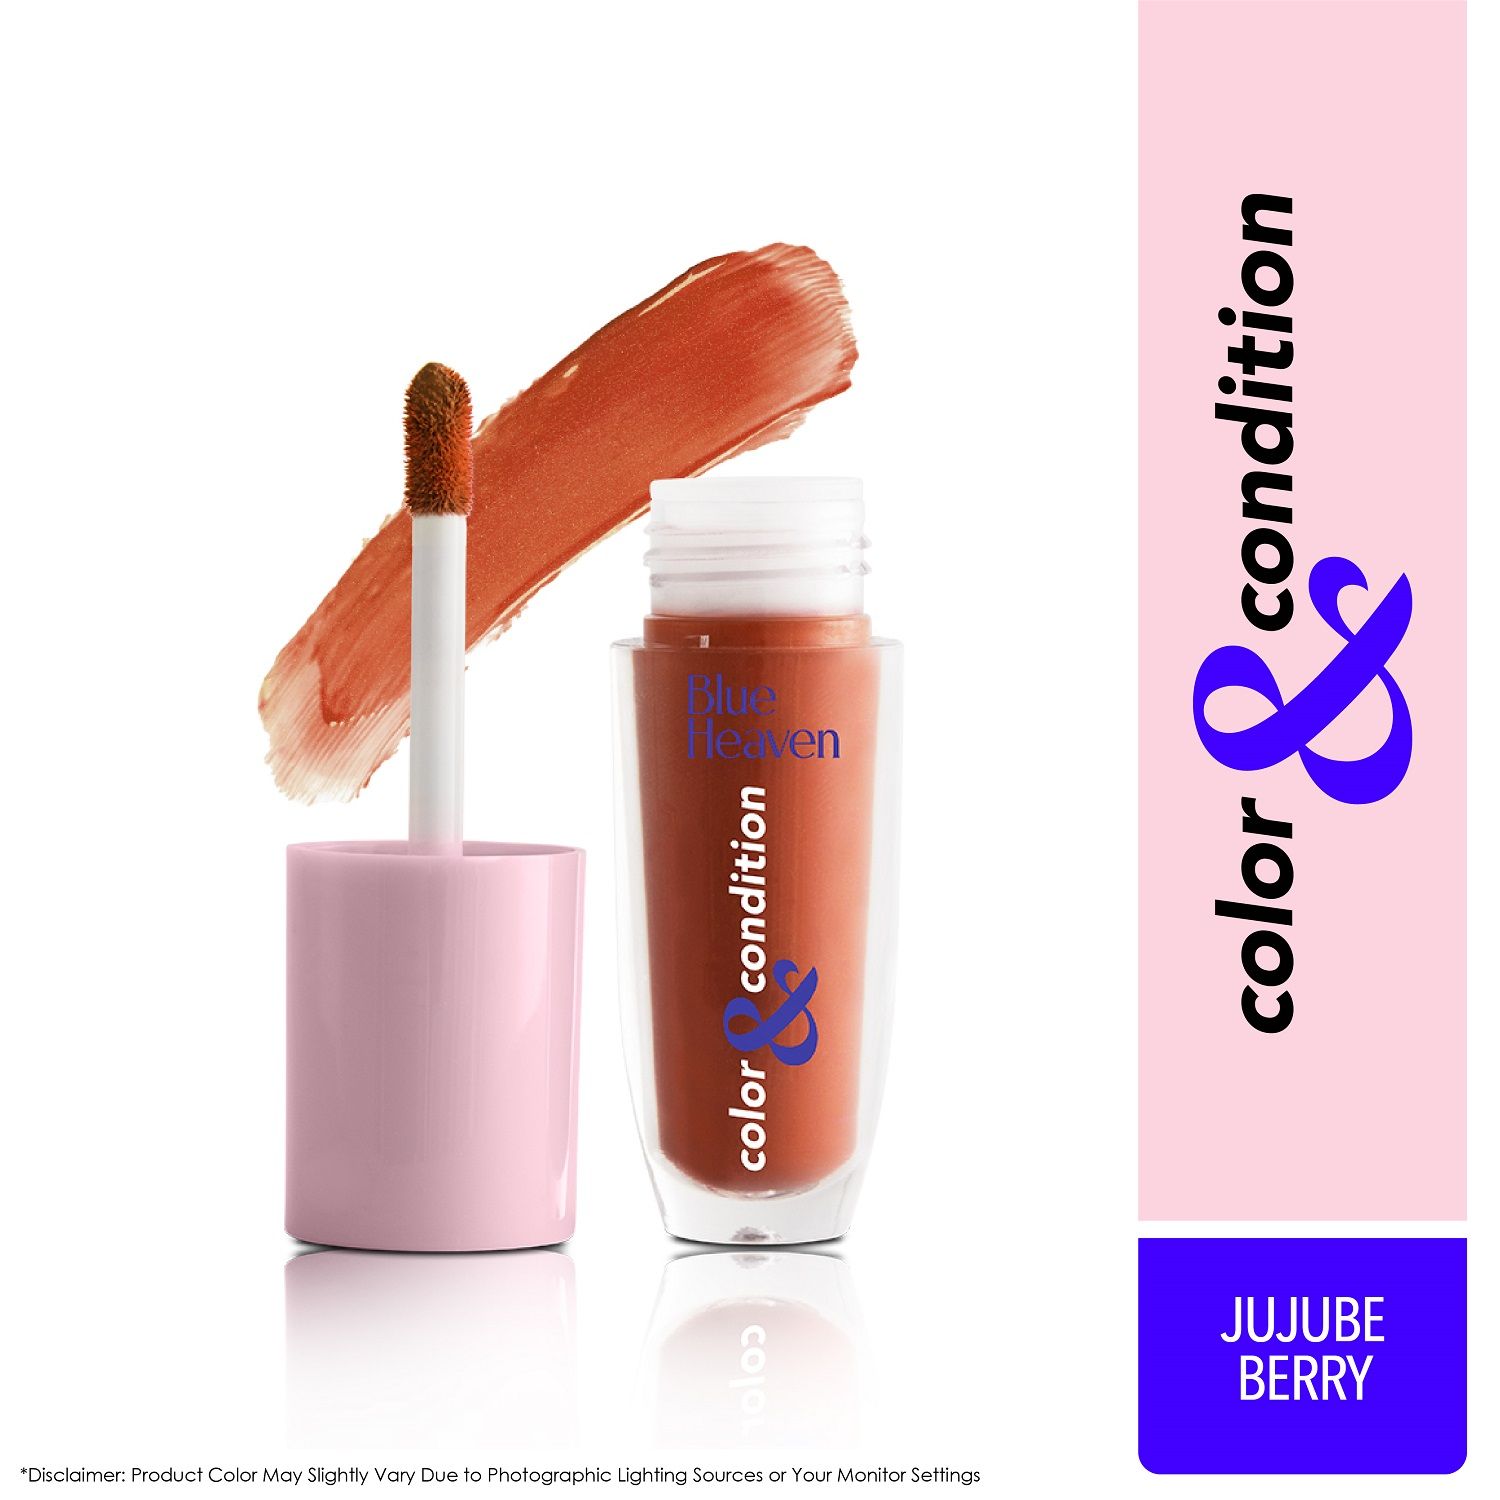 Blue Heaven Color & Condition Tinted Conditioning Lip Oil | 2-in-1 Liquid Lipstick & Lip Balm, Infused with Exotic Oils for Long Lasting Hydration, Jujube Berry